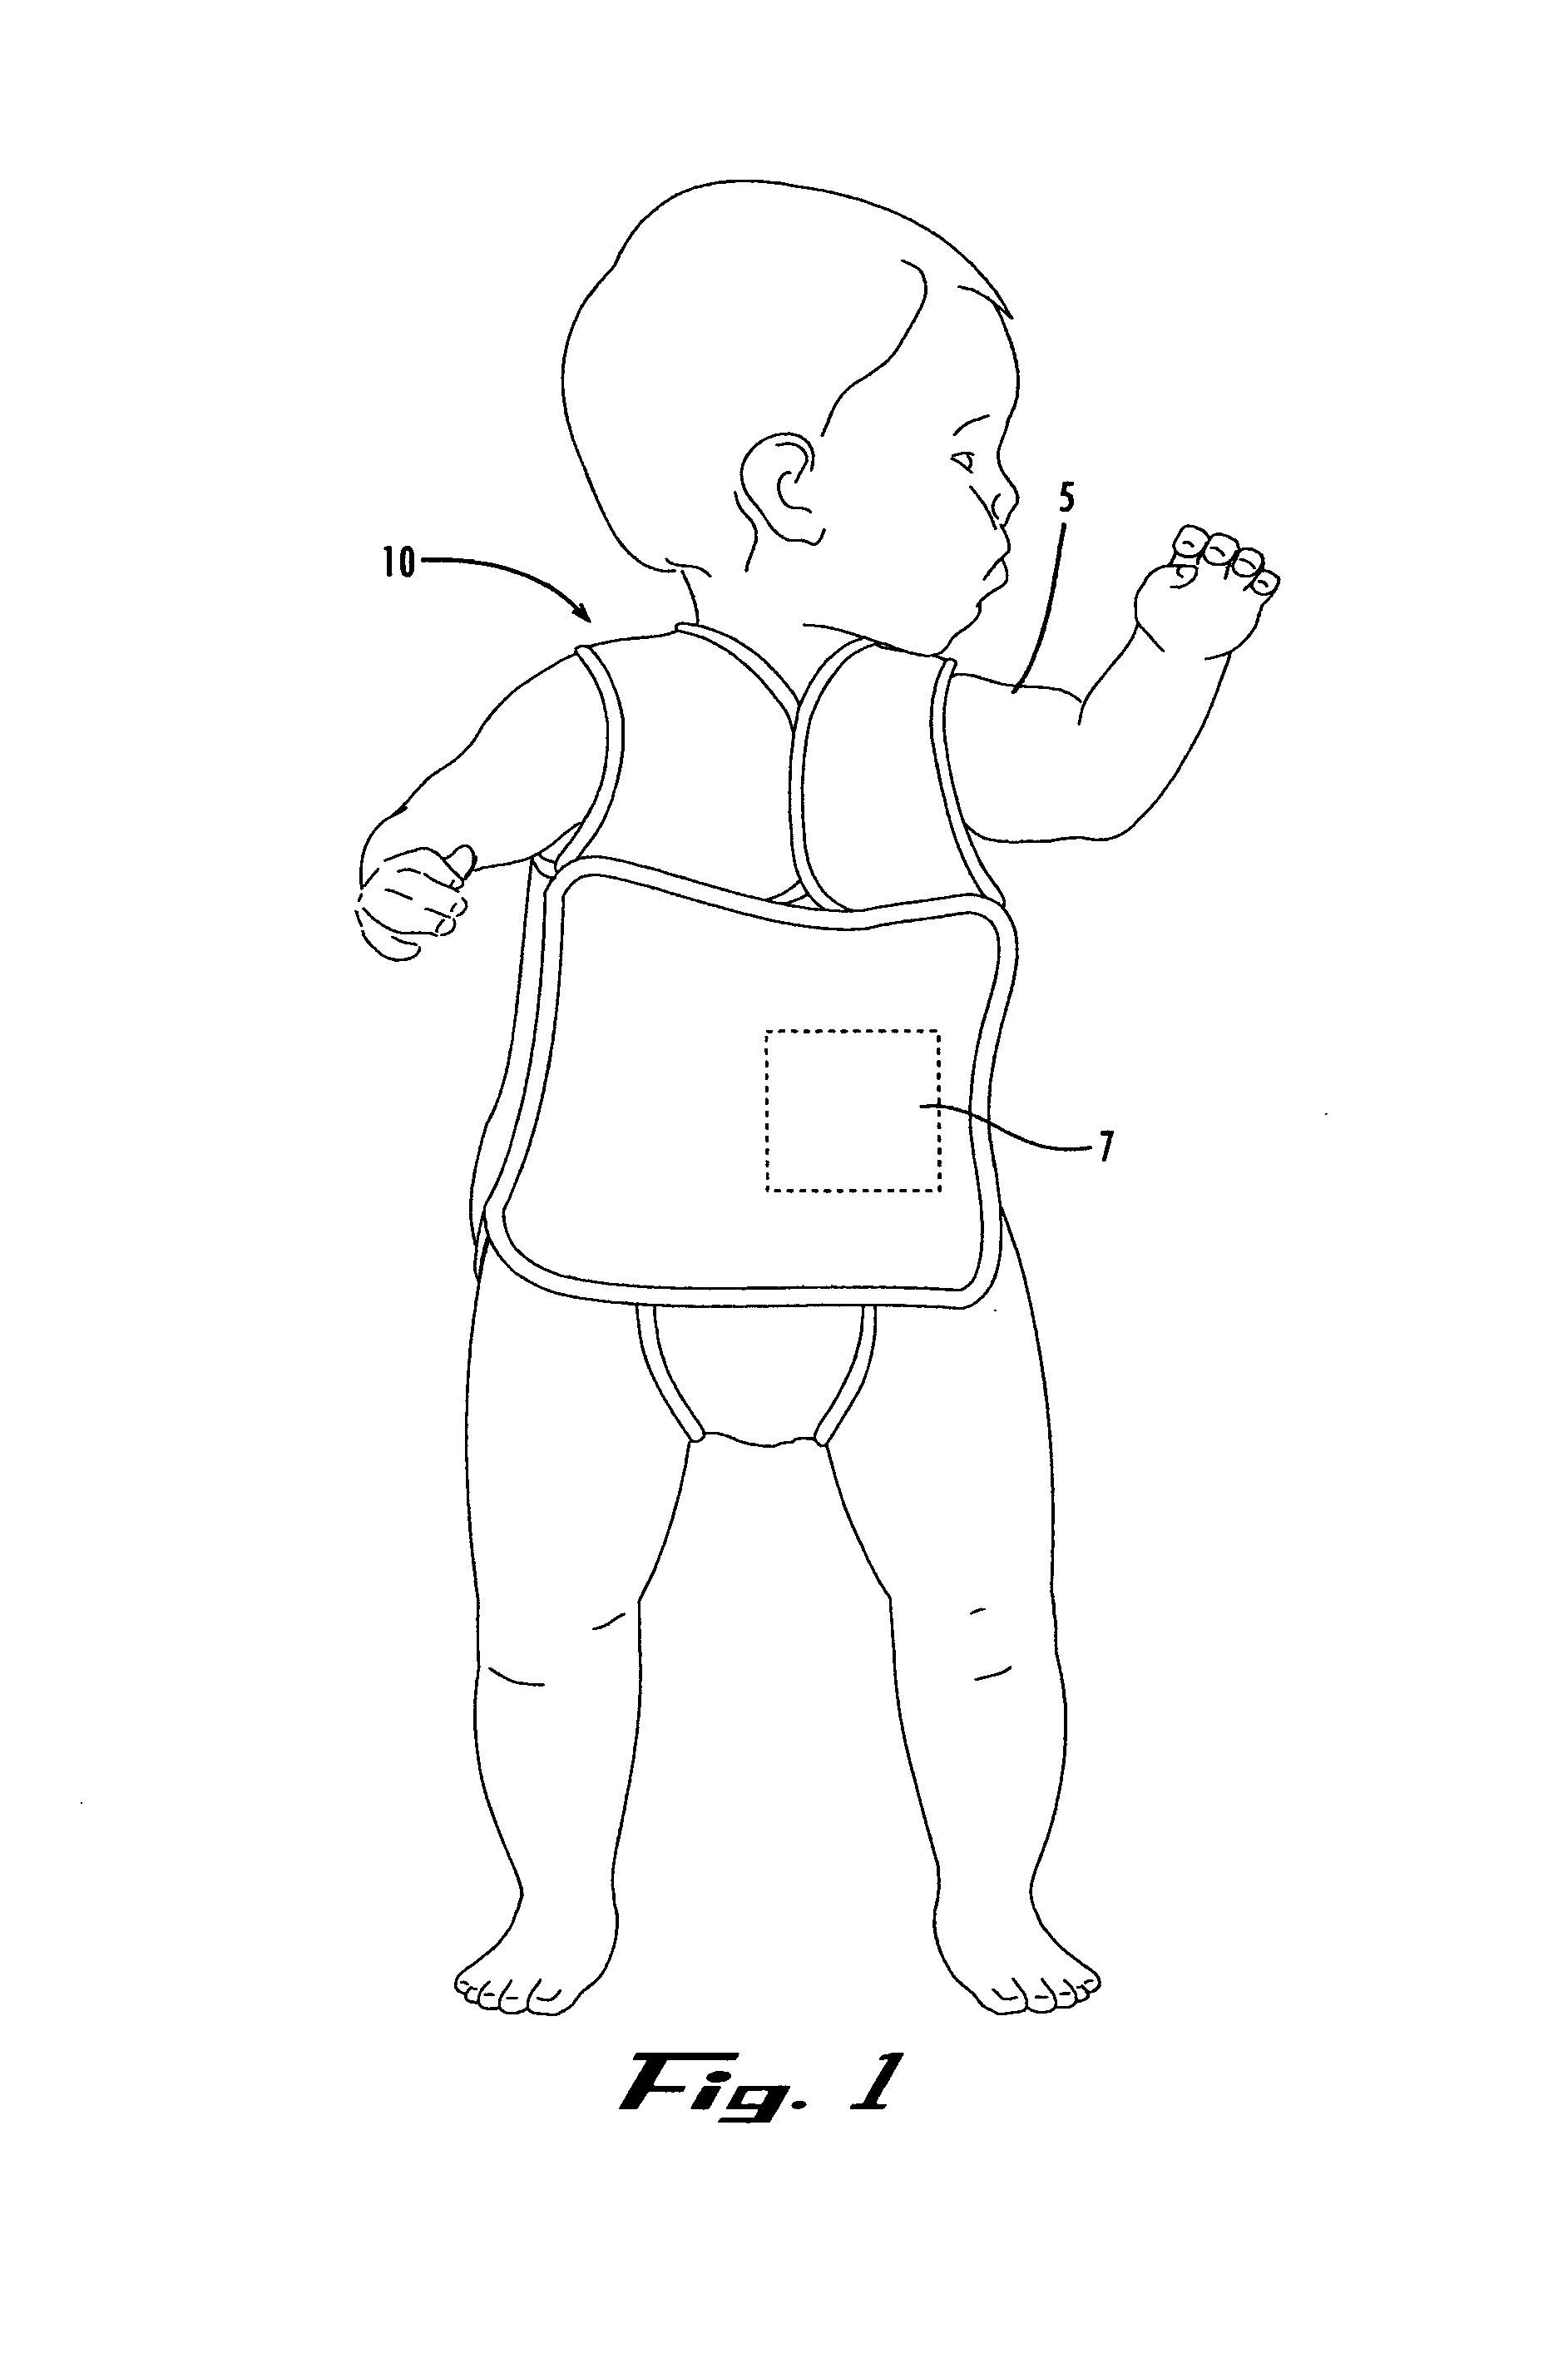 Garment for accomodating medical devices